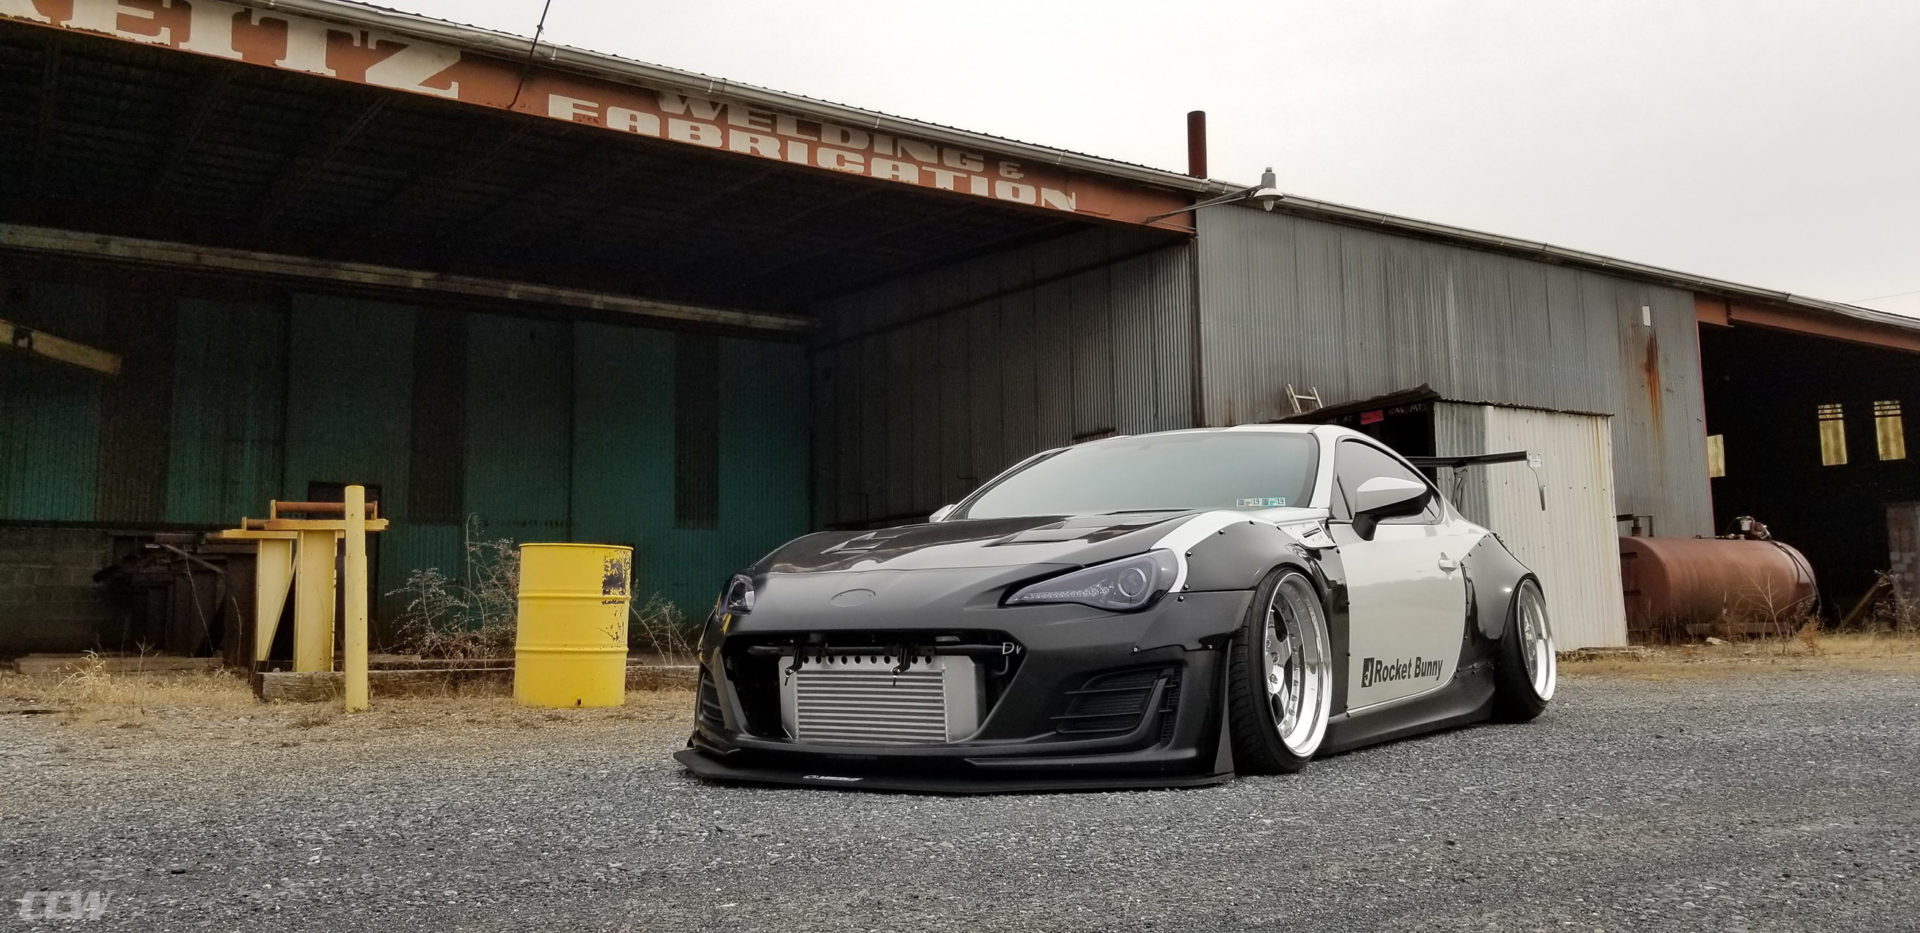 White Pandem Rocket Bunny Scion FRS - CCW LM5 Forged Wheels